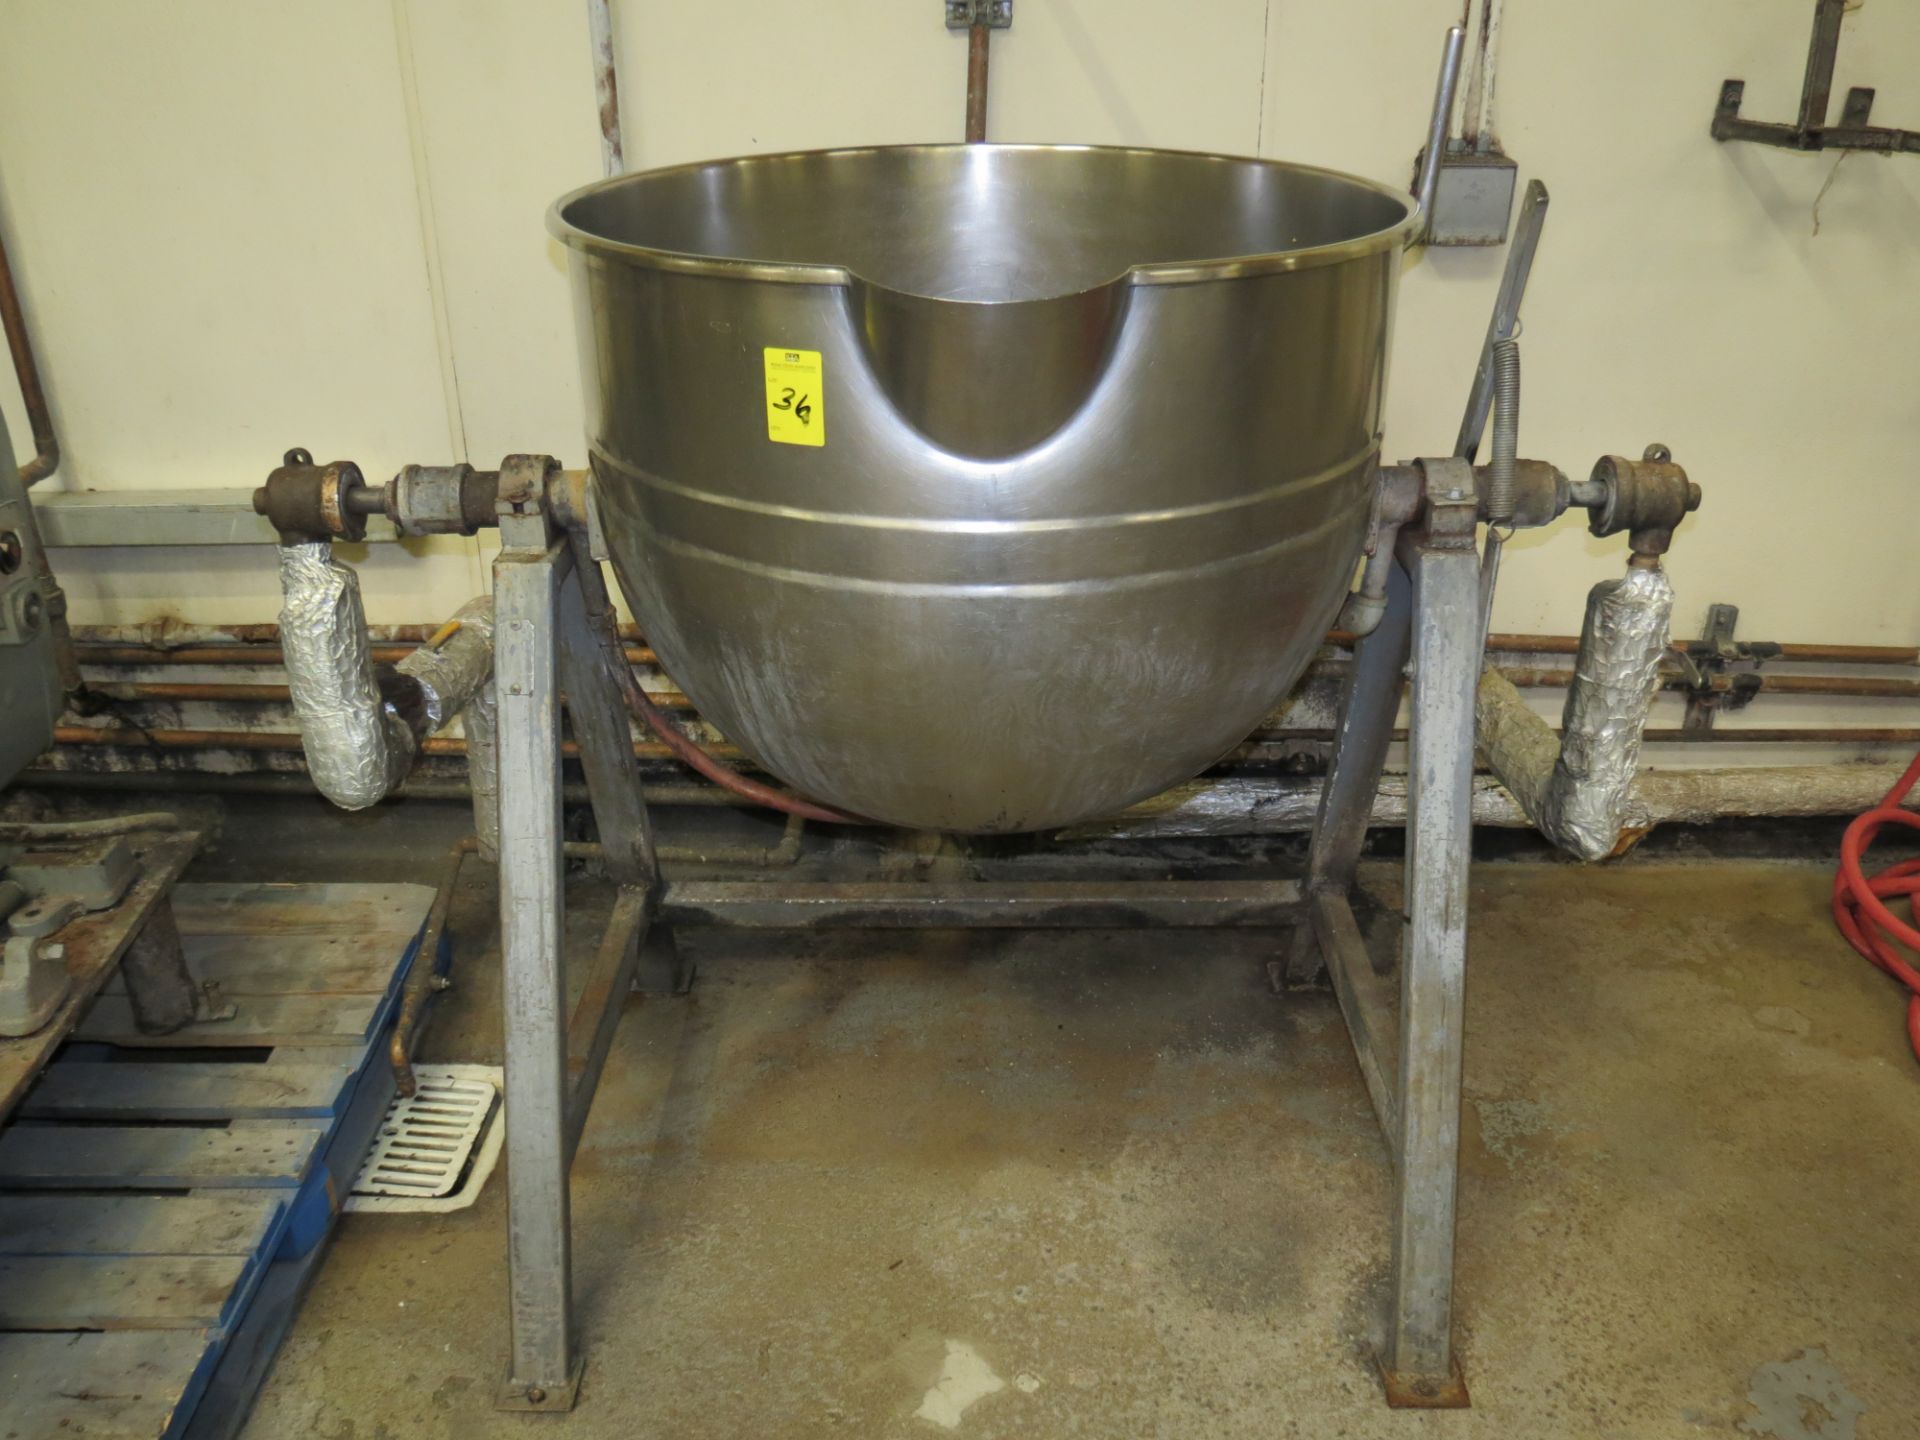 LEE METAL PRODUCTS STAINLESS STEEL 60 GALLON STEAM TILTING KETTLE SN:995T